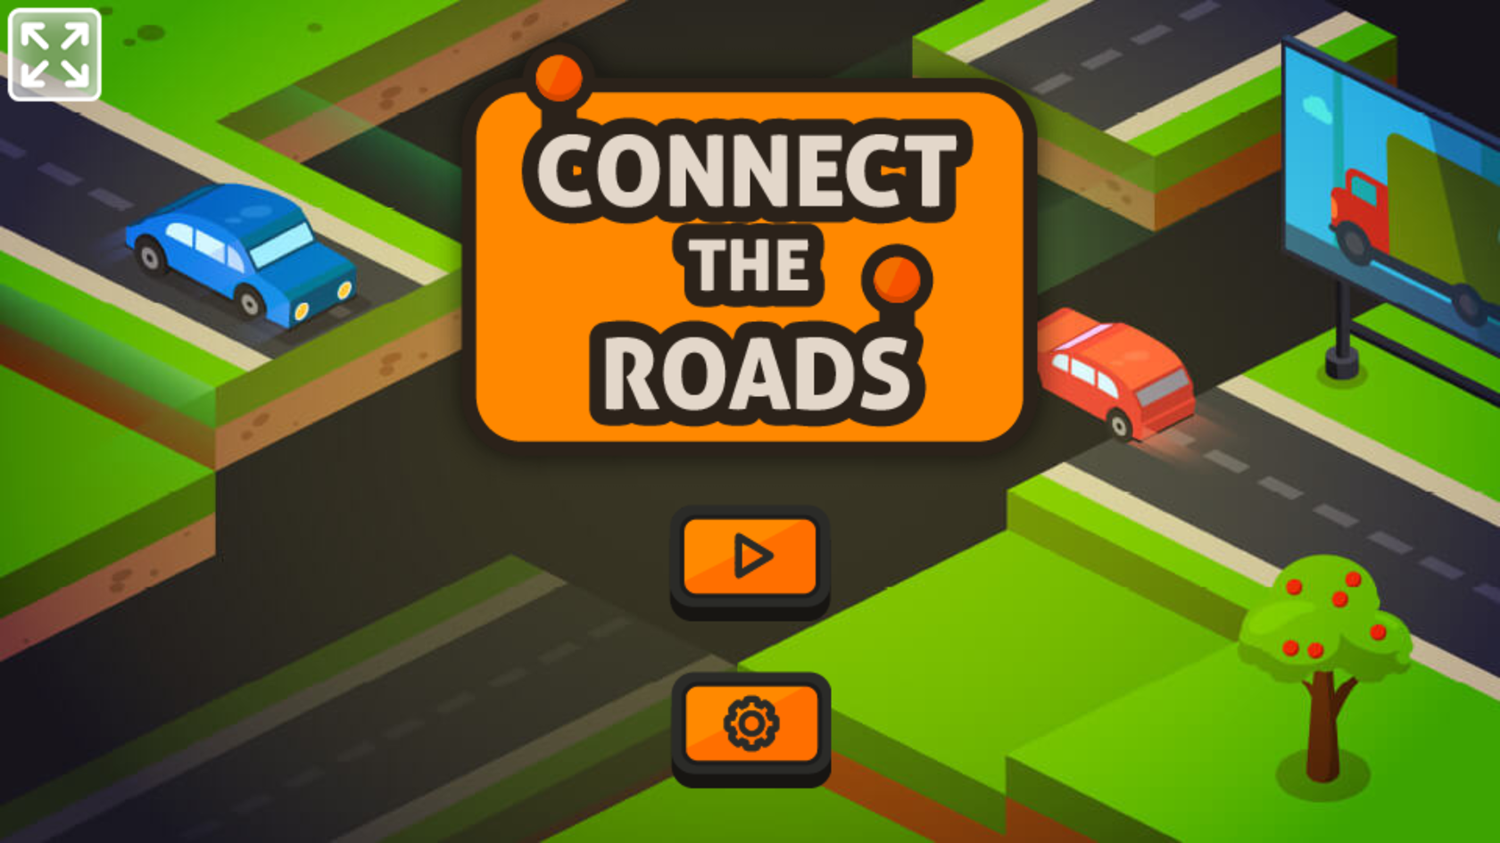 Connect The Roads Game Welcome Screen Screenshot.